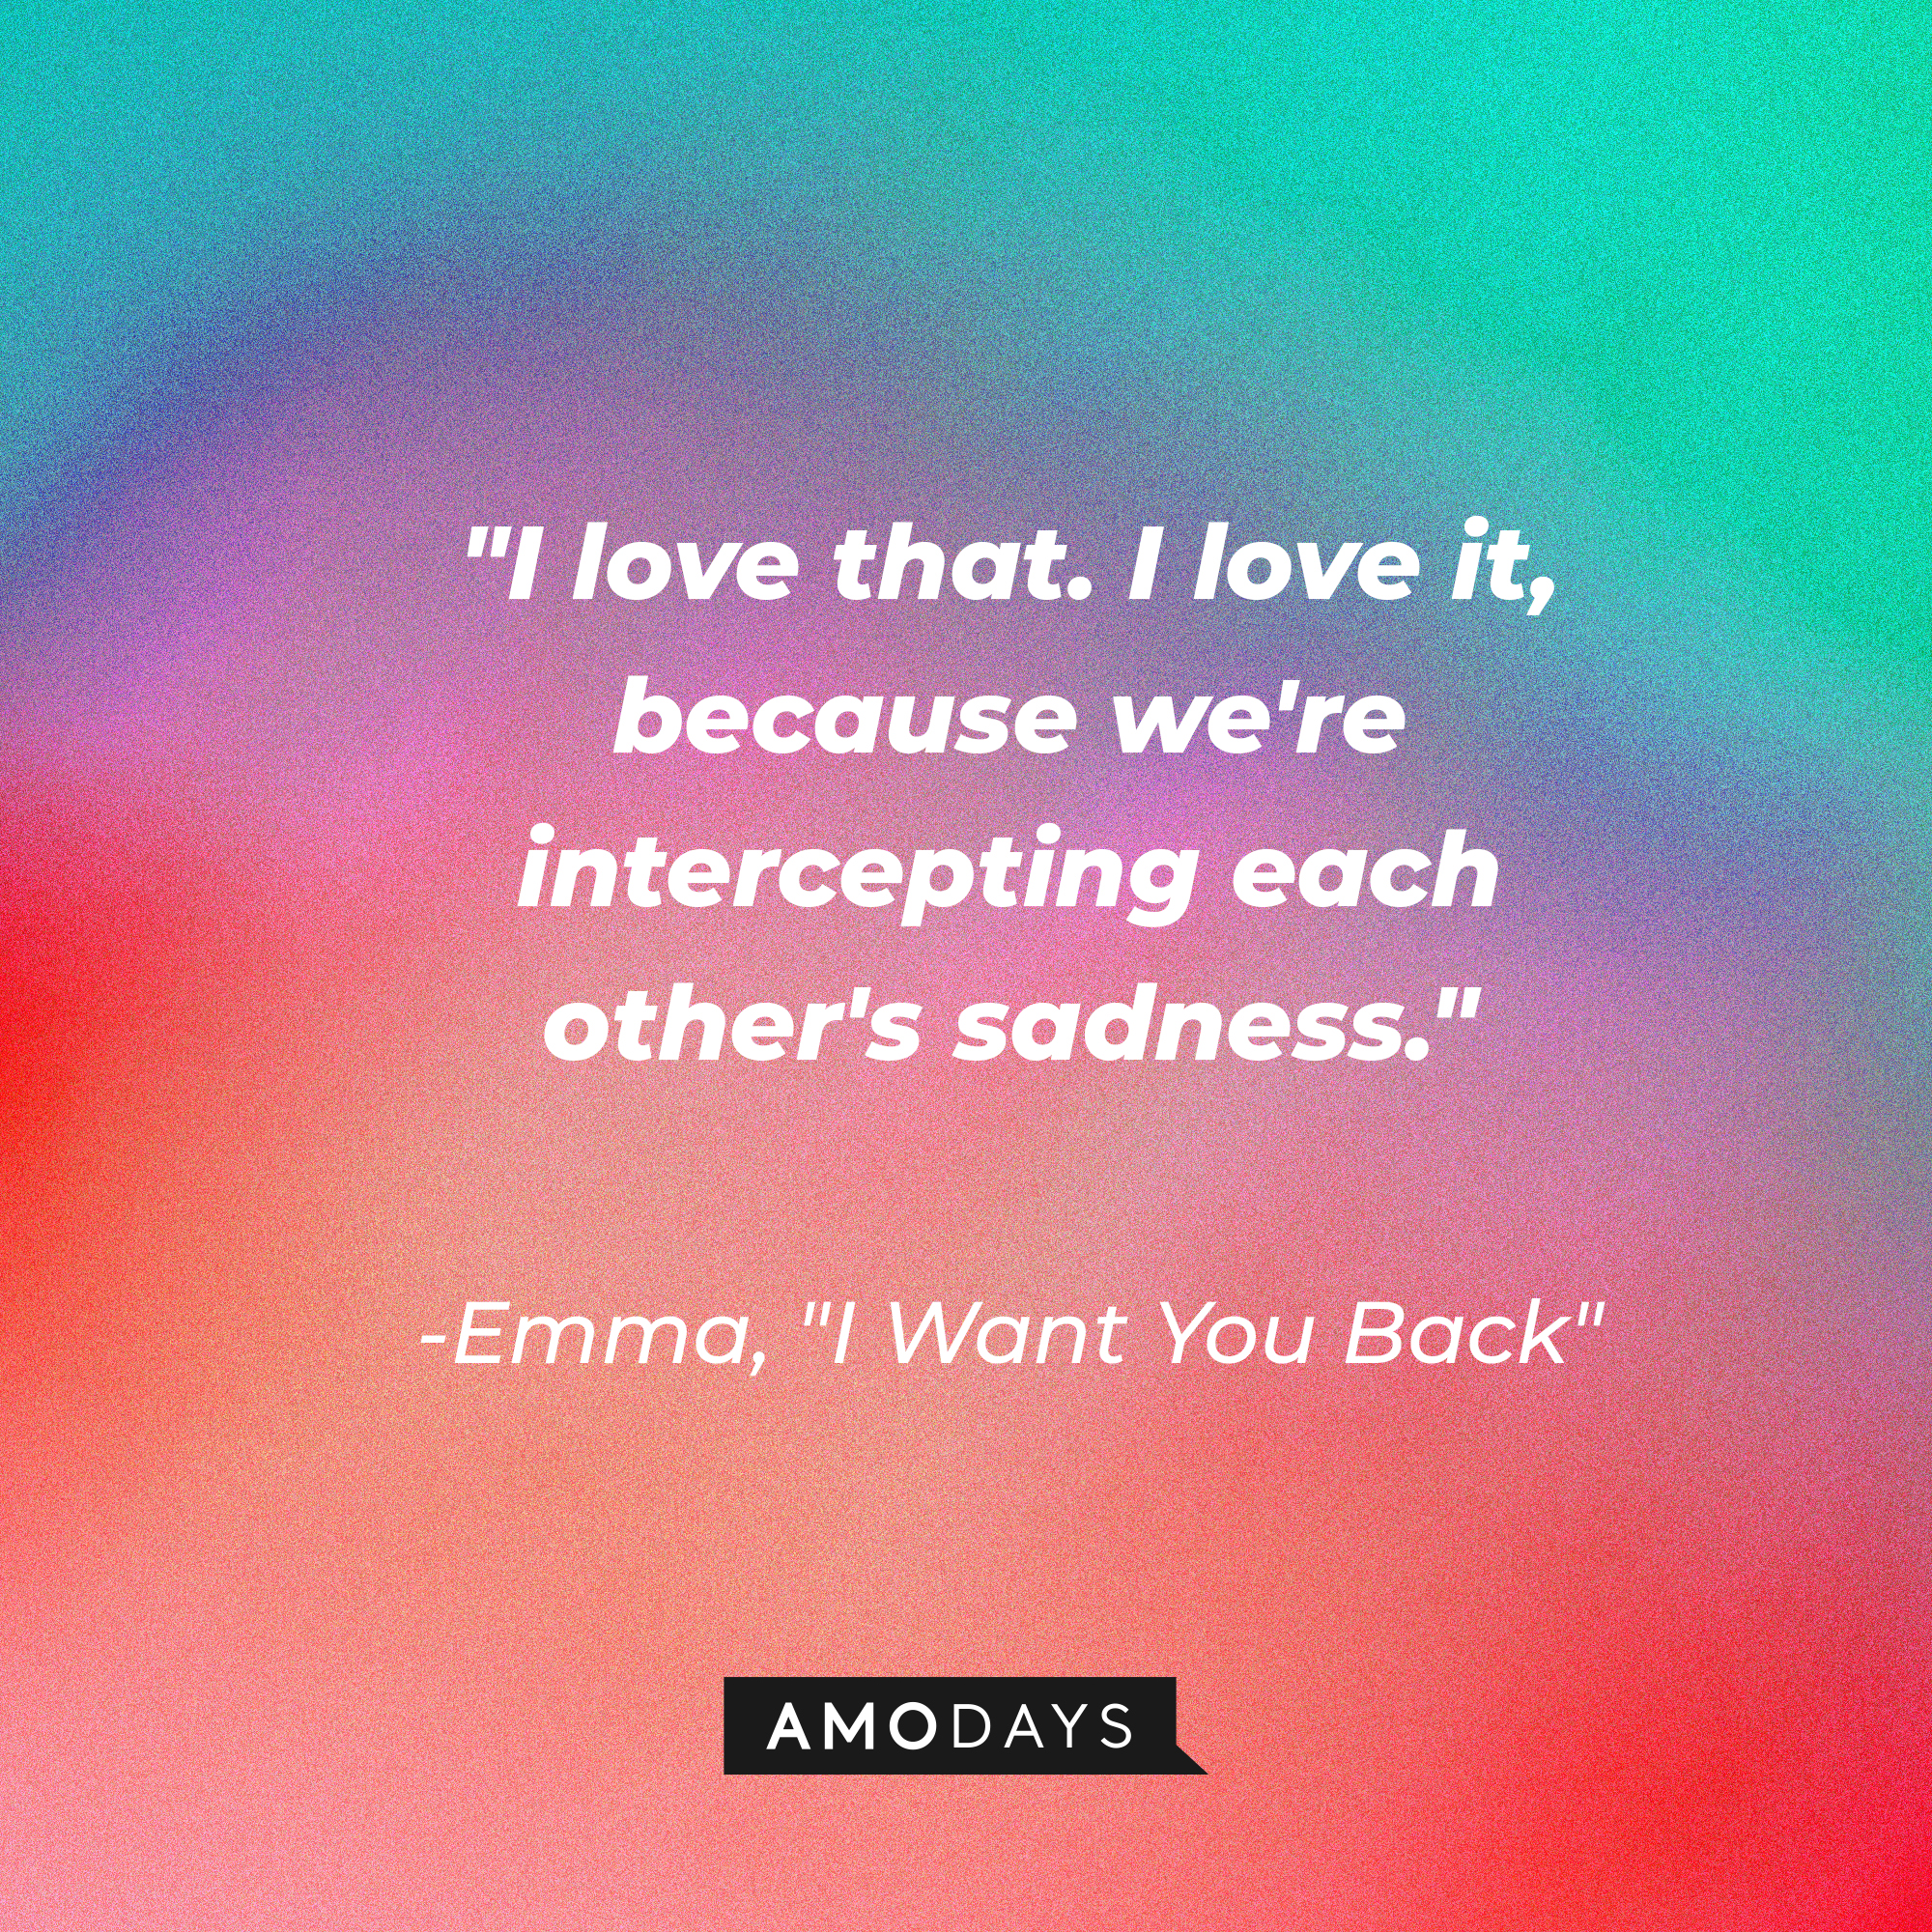 Emma's quote in "I Want You Back:" "I love that. I love it, because we're intercepting each other's sadness."  | Source: AmoDays